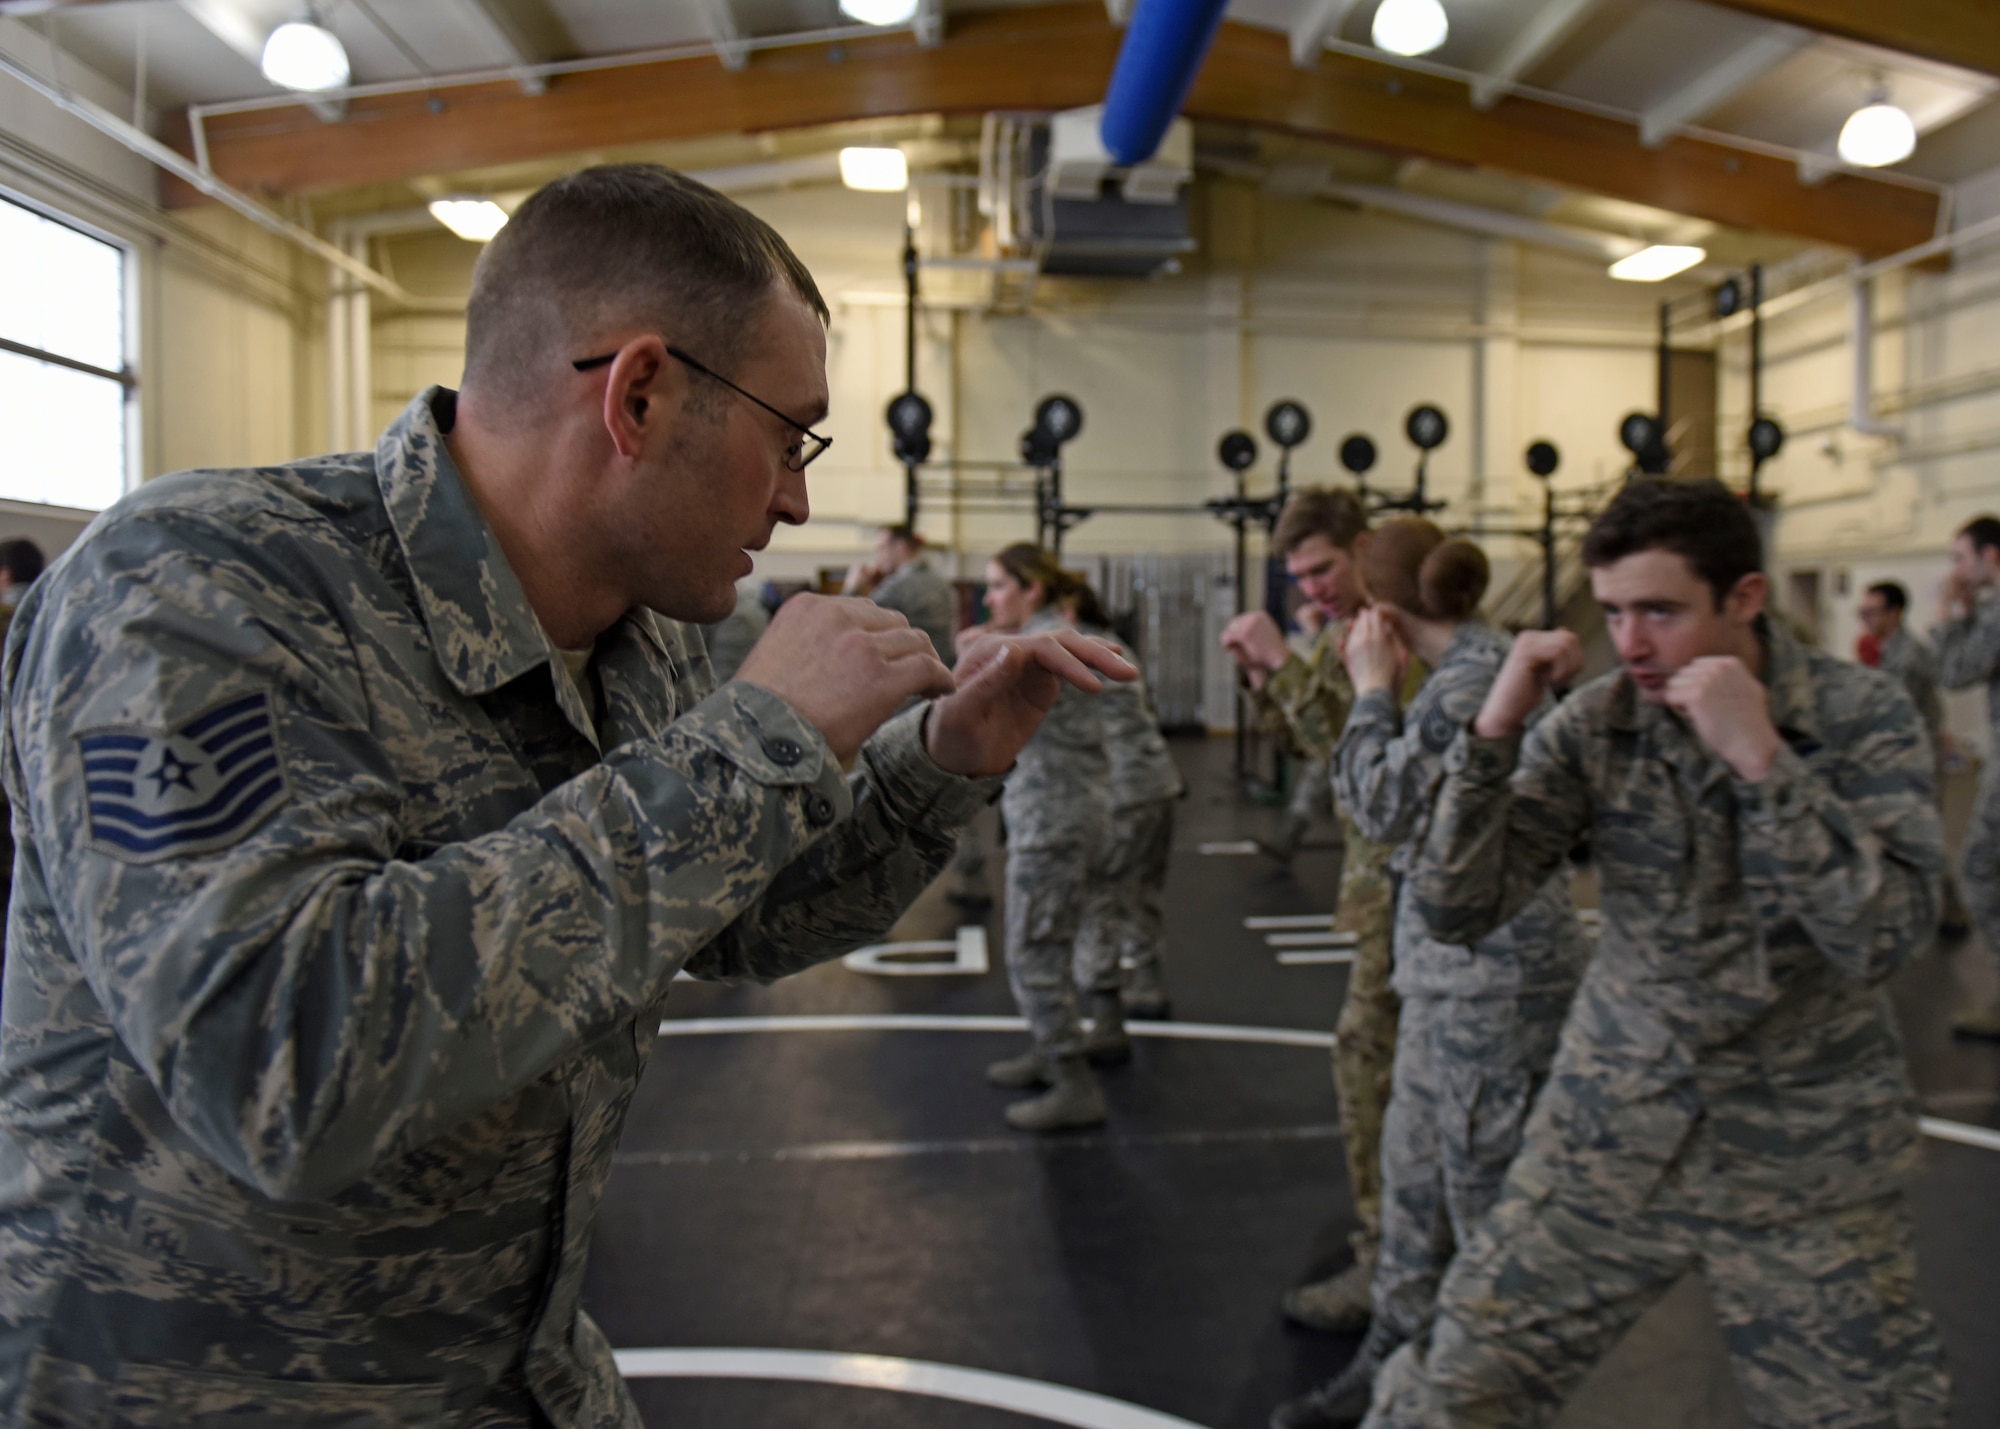 U.S. Air Force Tech. Sgt. Jarad Underwood, 22nd Training Squadron Advanced Skills Training NCO in charge, does one-on-one training with an Airman during combat survival training for aircrew and battlefield Airmen at Fairchild Air Force Base, Washington, Jan. 31, 2019. The combatives class teaches projectile striking, clenching and grappling self-defense techniques to prepare Airmen for any emergency event or captivity situation. (U.S. Air Force photo/Senior Airman Jesenia Landaverde)